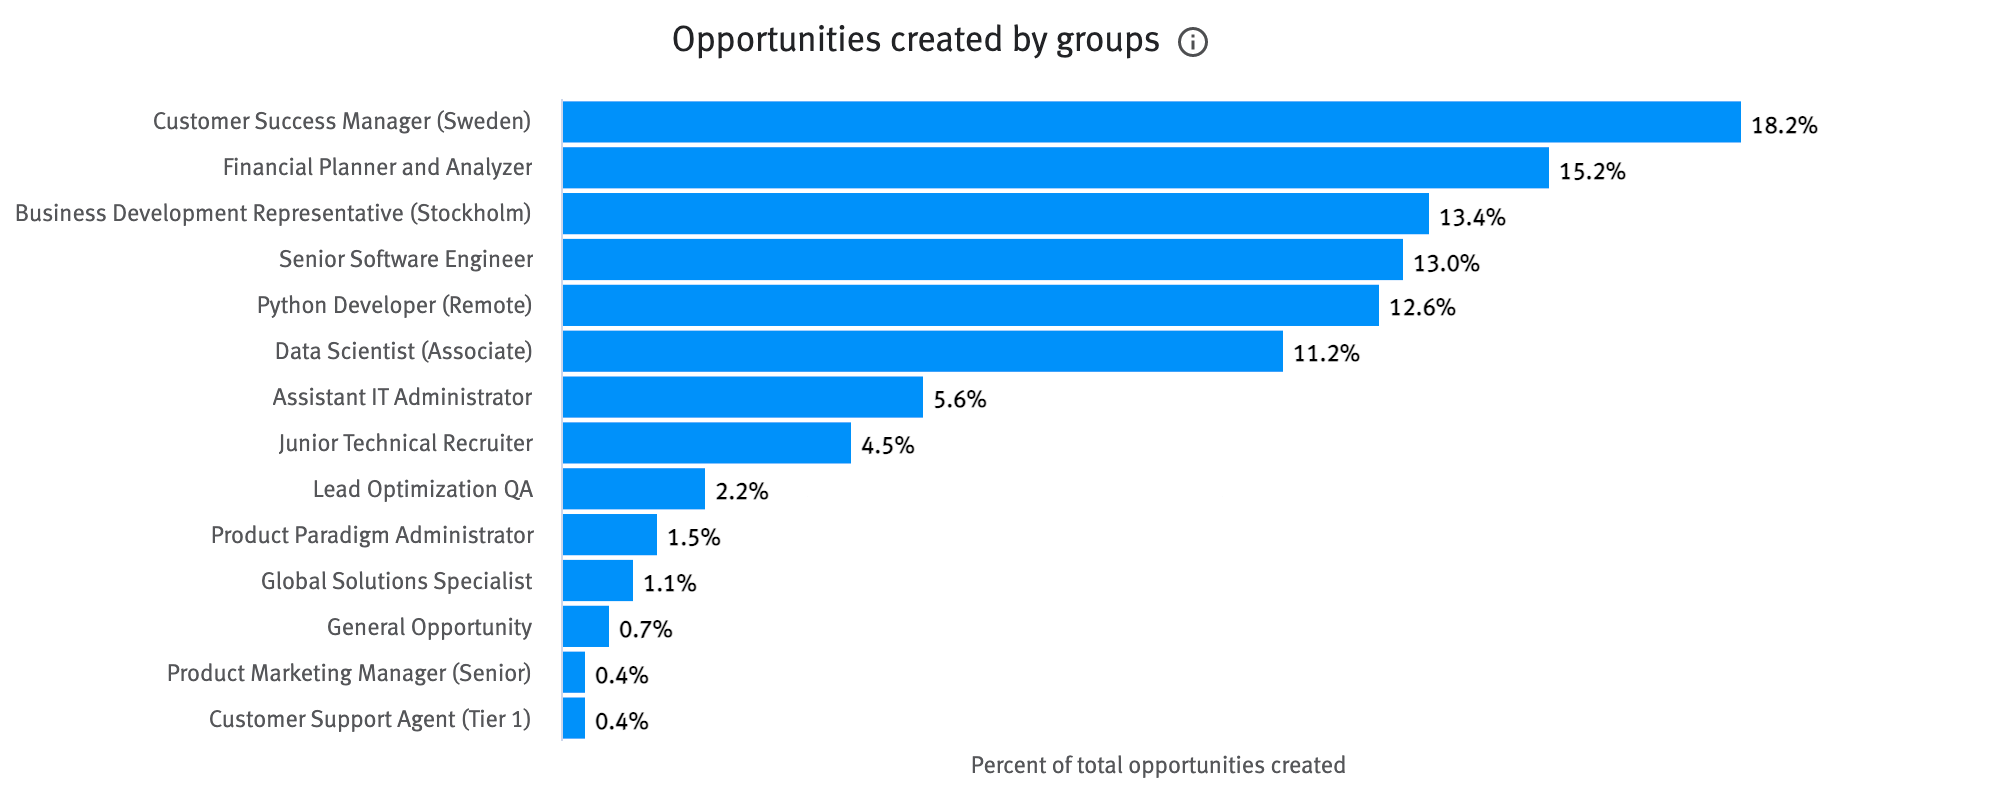 Opportunities created by groups chart